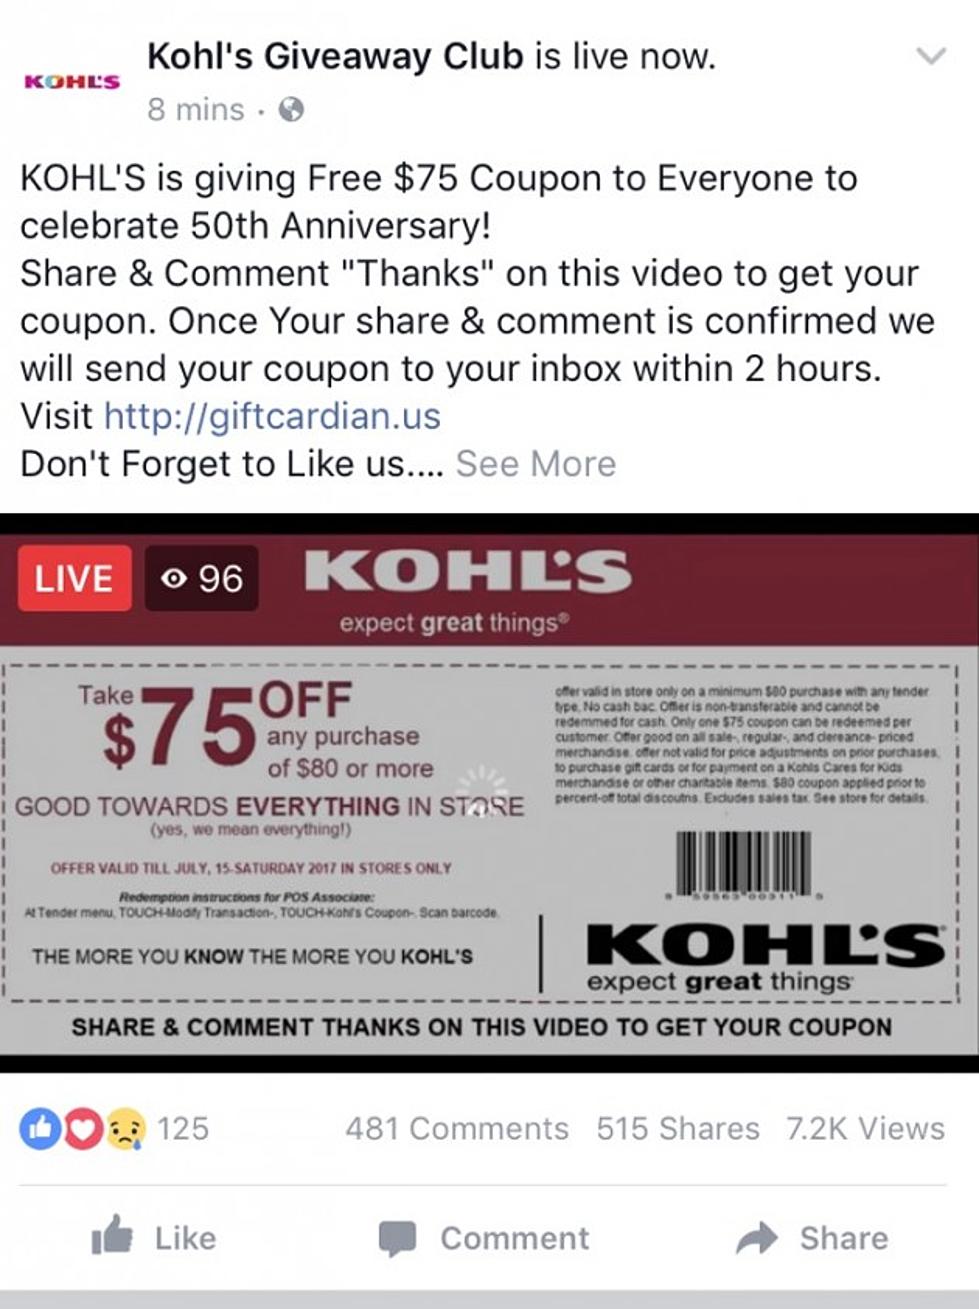 Michiganders: Stop Falling For This Fake Kohl&#8217;s Facebook Giveaway Scam!